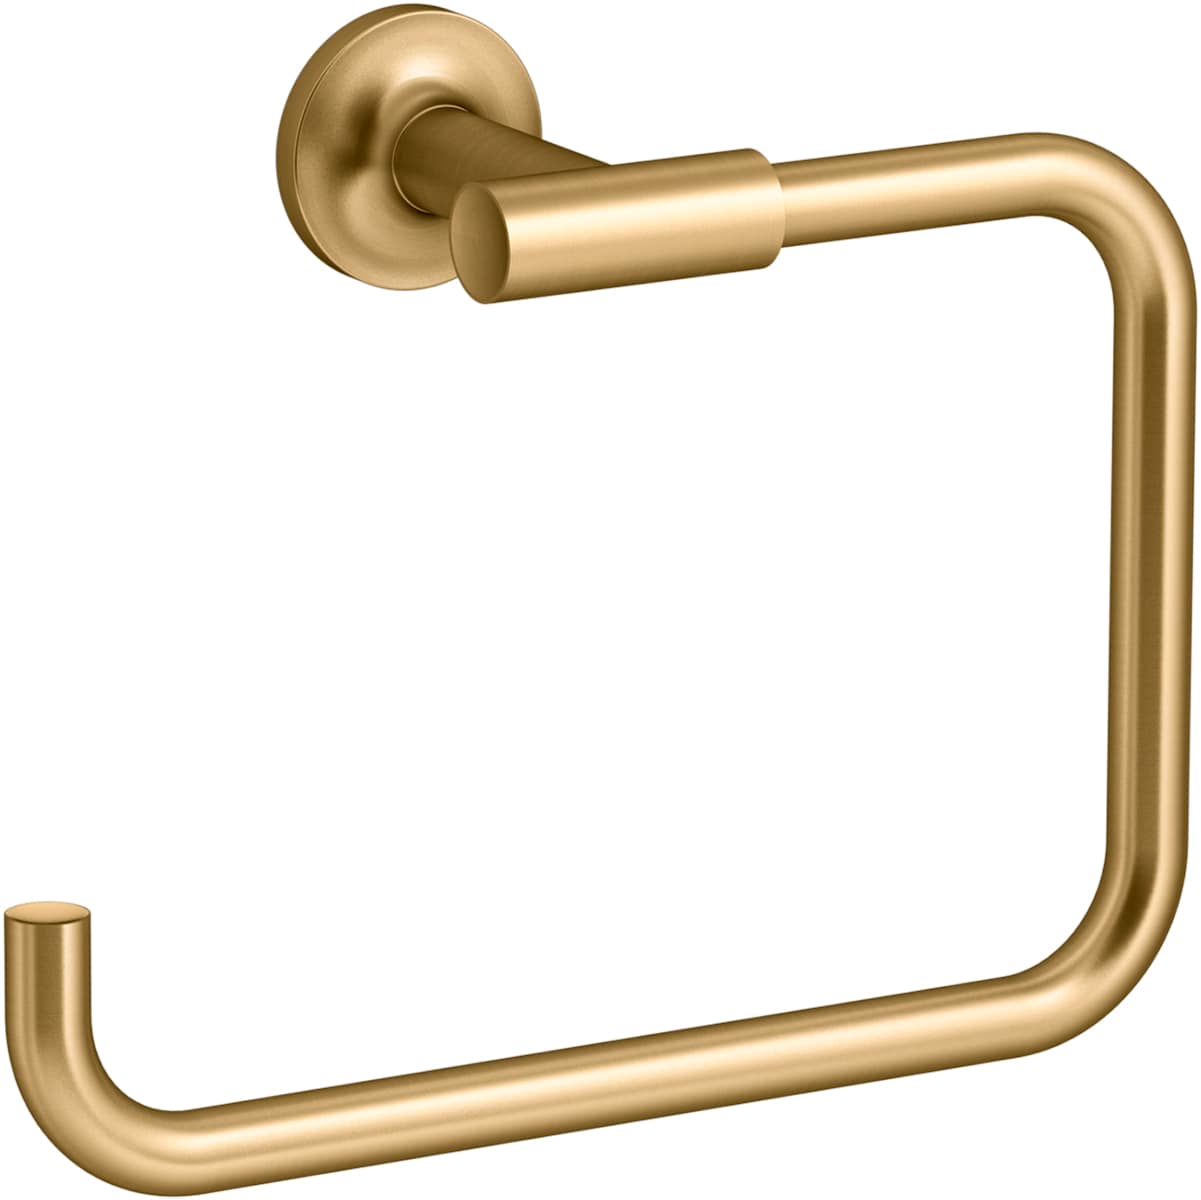 at Towel Mount Ring Brass Vibrant KOHLER Single Moderne Rings Purist in Towel department Brushed Wall the